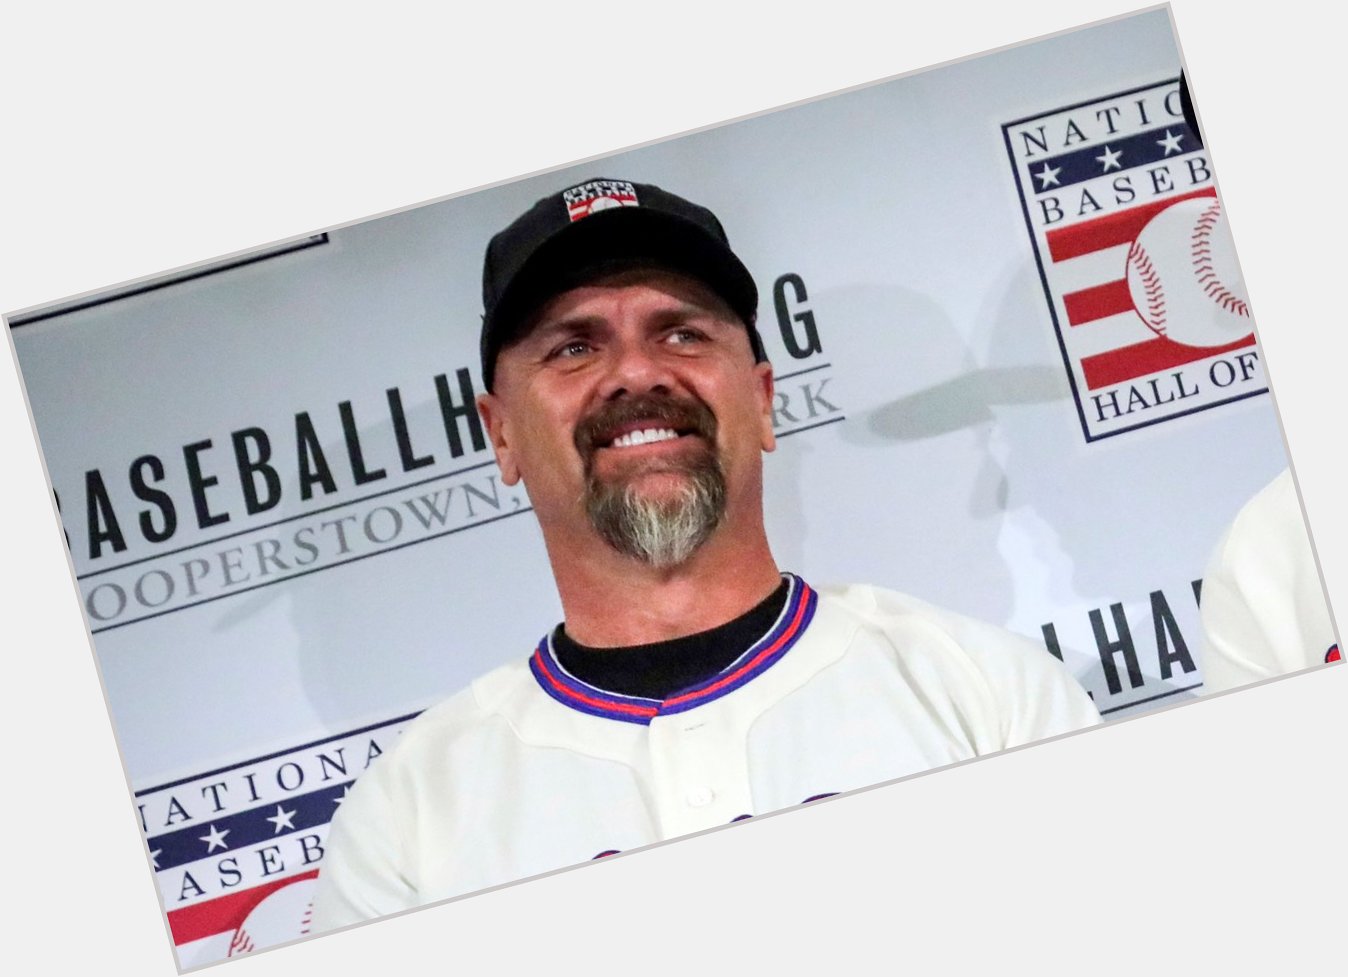 Happy 54th Birthday Larry Walker! He is 1 of 9 Baseball Hall of Fame players to have worn an uniform. 